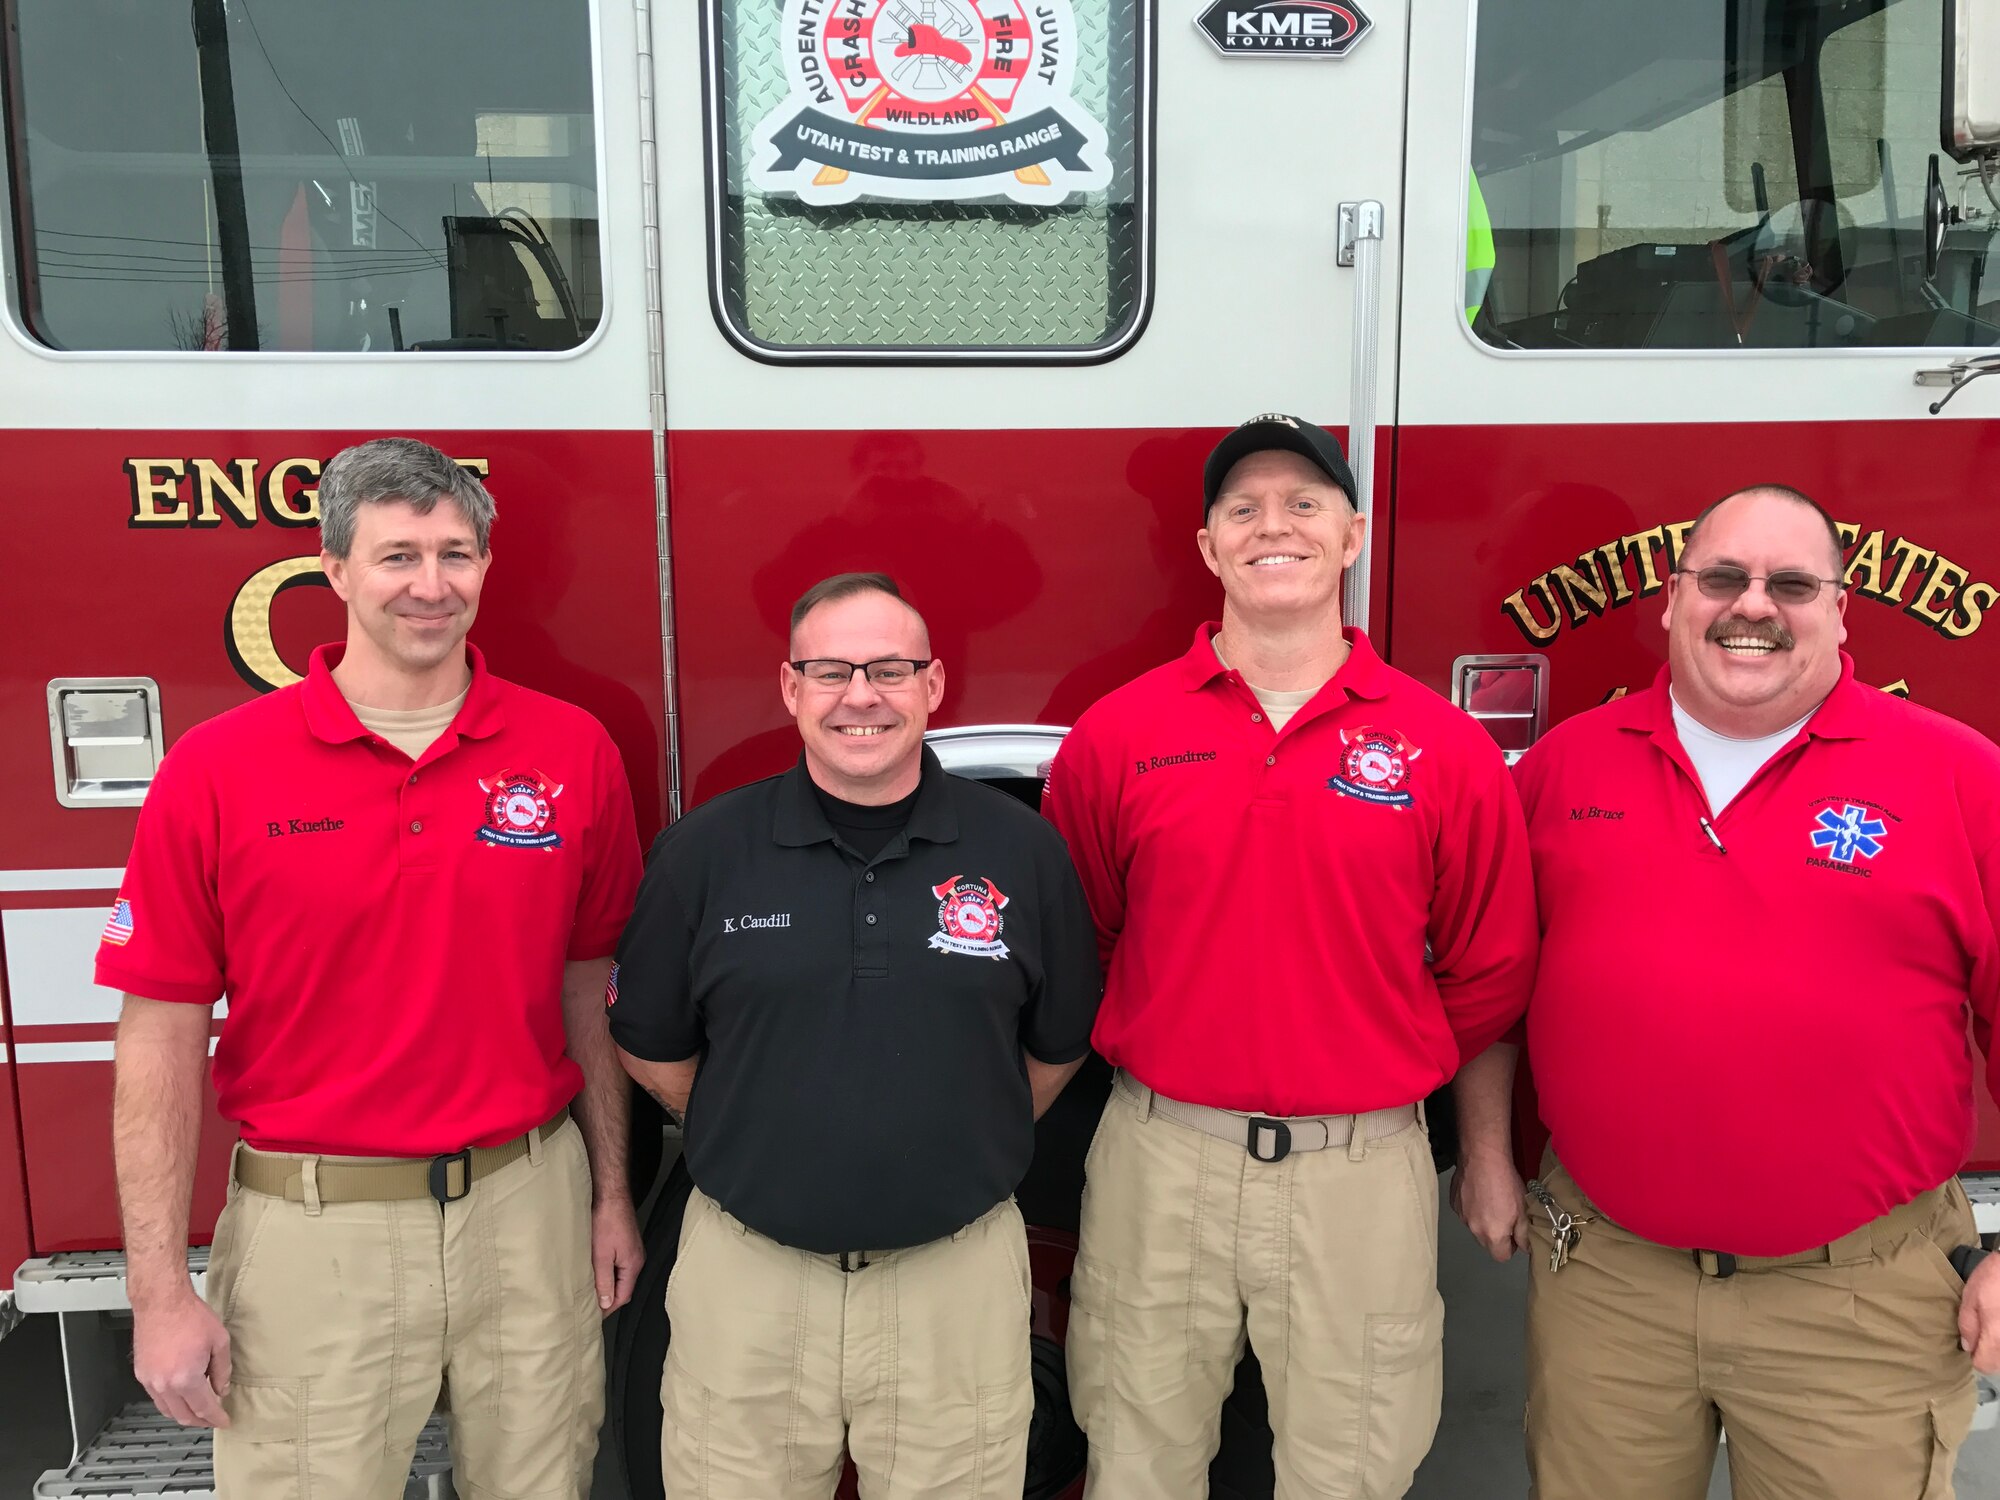 From the left, Capt. Benjamin Kuethe, Assistant Chief Kevin Caudill, Lt. Benjamin Roundtree and Paramedic Micheal Bruce pose for a photo at the Utah Test and Training Range, March 23. Ron D'Andrea was unavailable. (Courtesy photo)